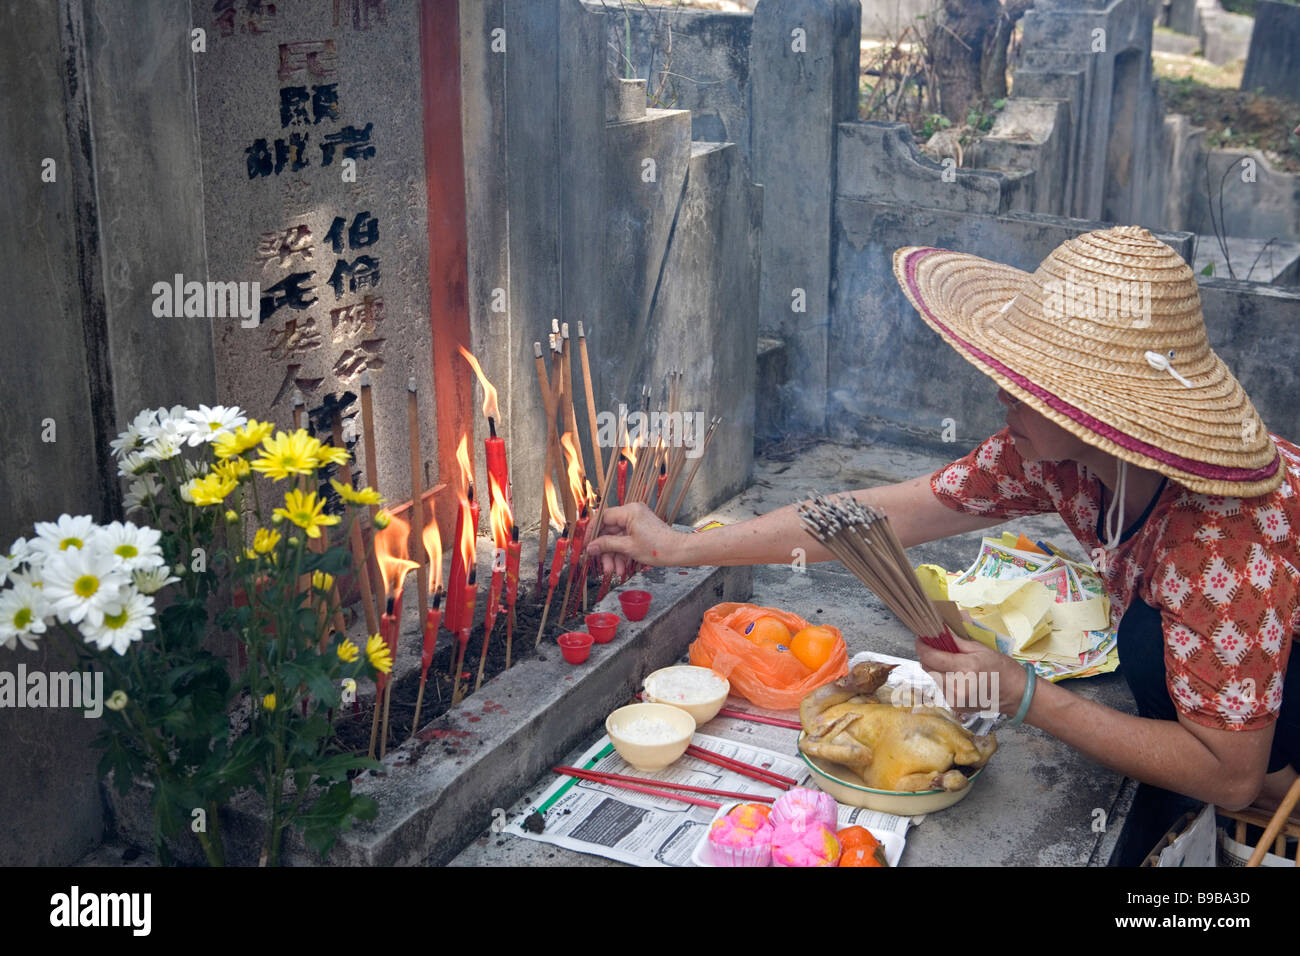 Offerings and lighting up of josticks at a tombstone during Qing Ming in Malaysia, South East Asia Stock Photo